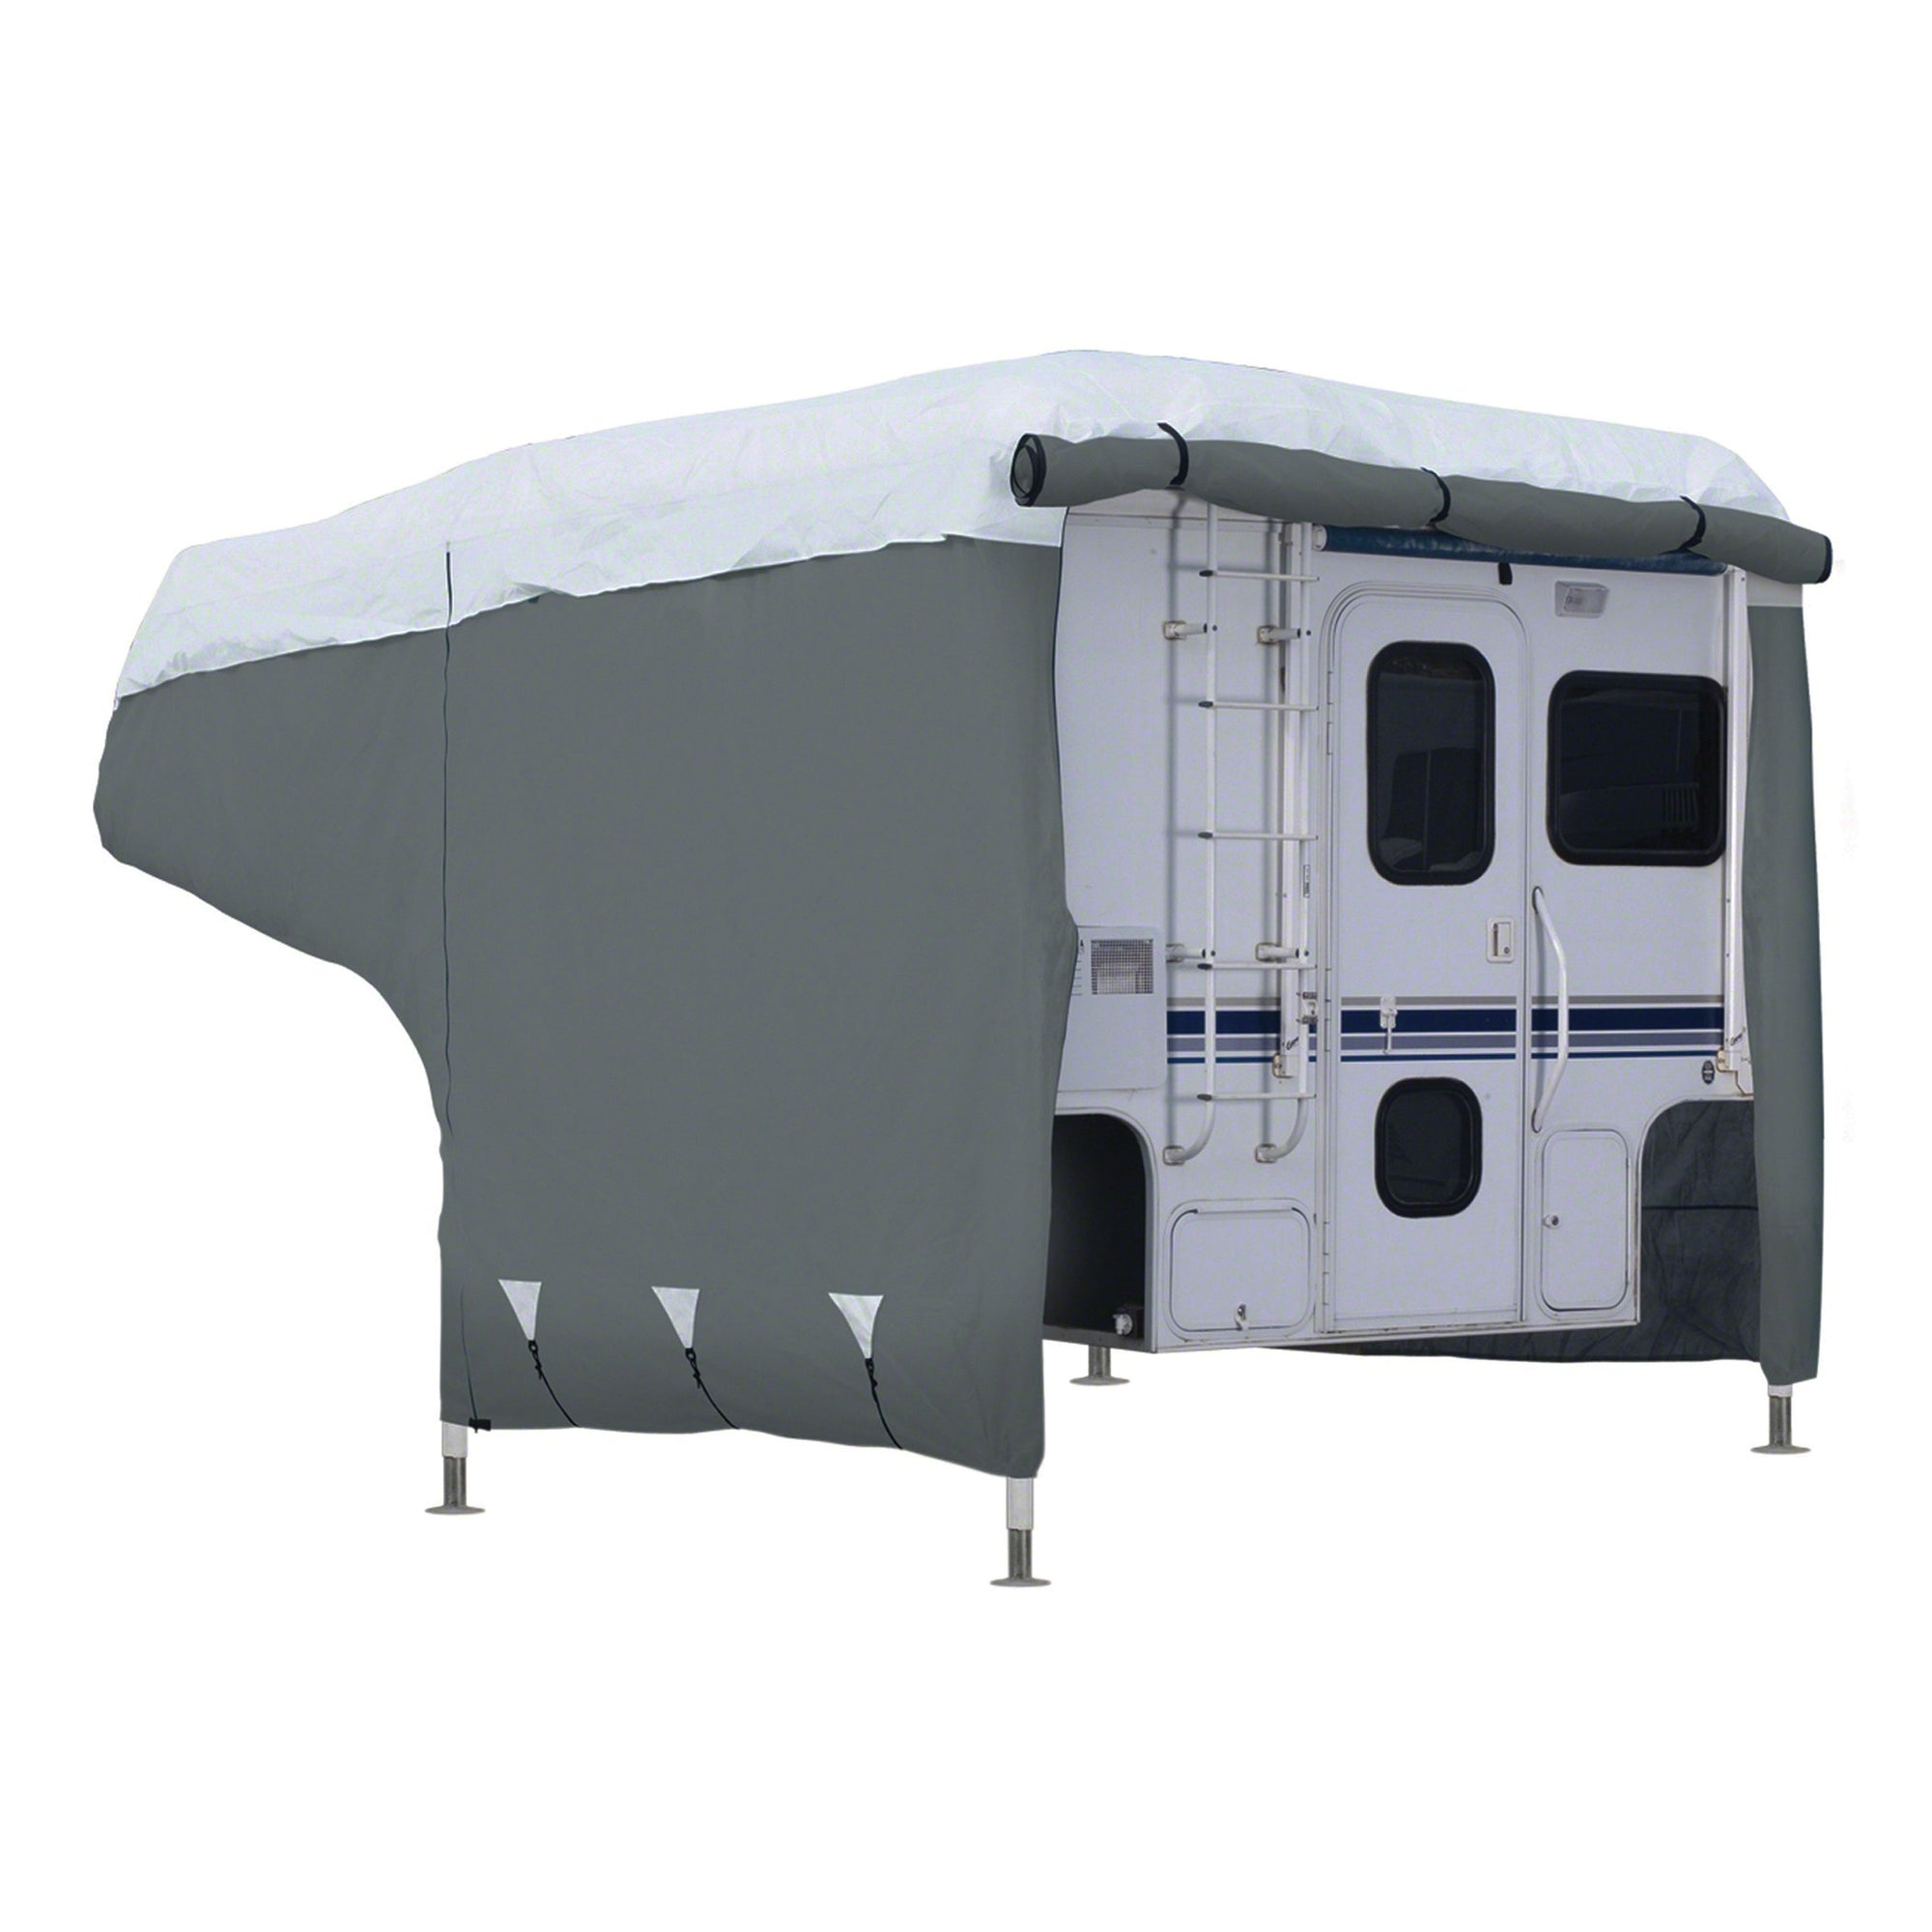 Classic Accessories 80-037 PolyPRO 3 Model 2 RV PP3 Camper Cover - 10' to 12'